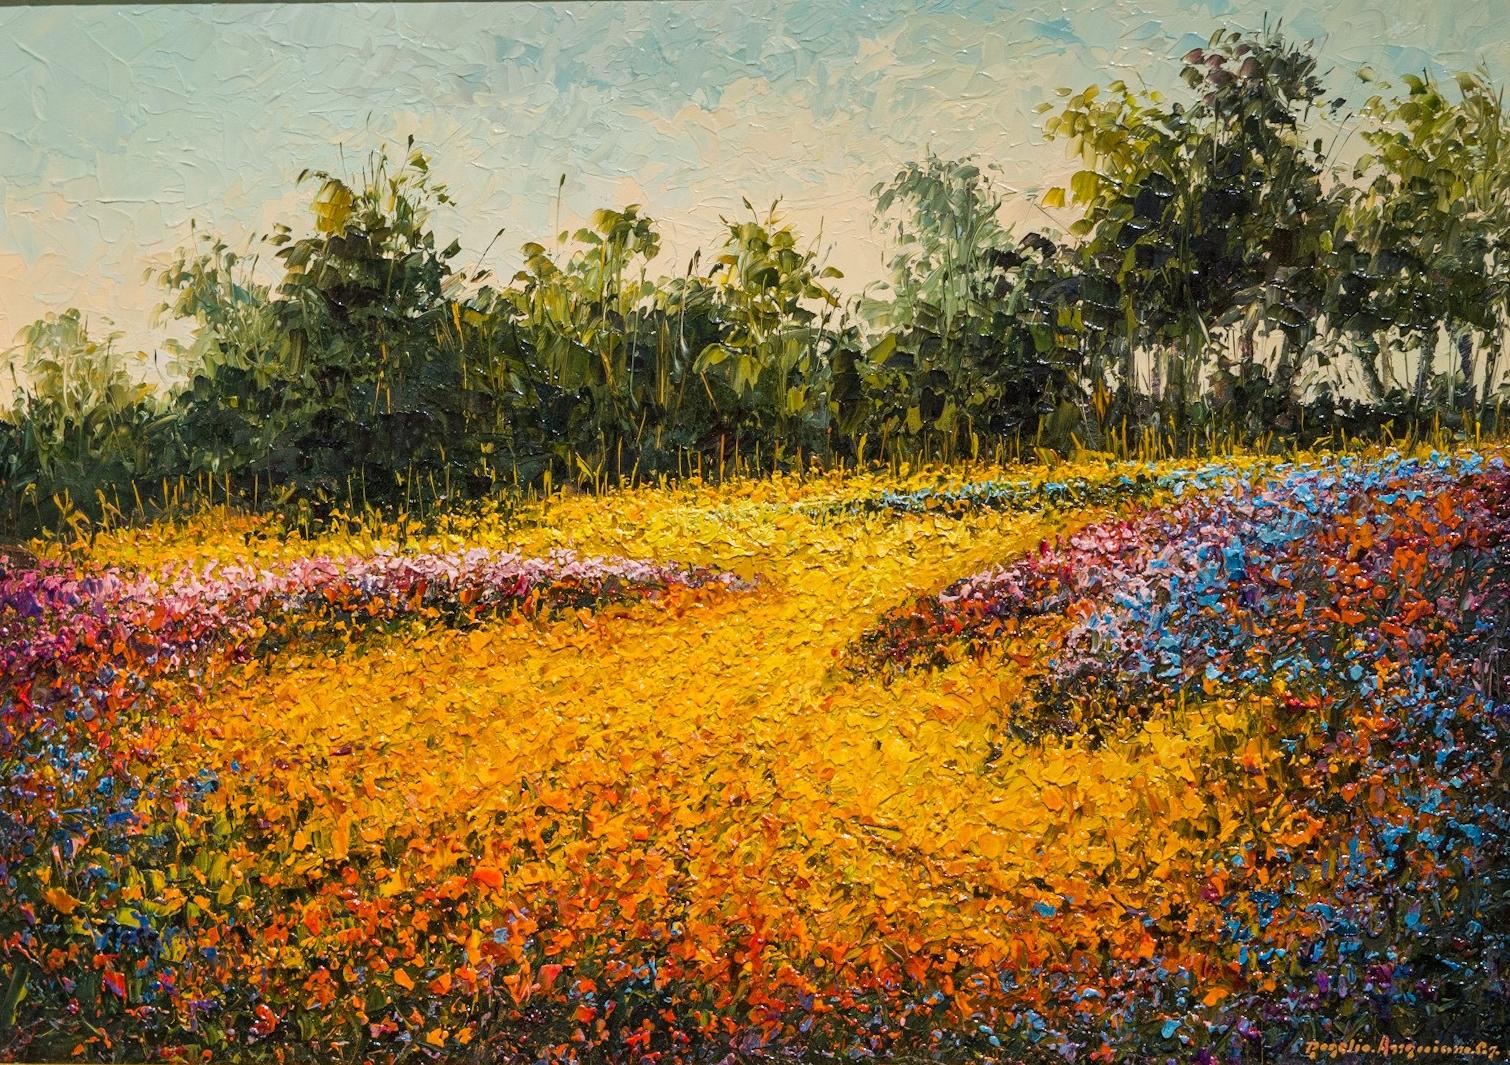 Rogelio Anguiano Cabrera Landscape Painting -  Field of Flowers  Oil on Panel   Palette Knife  Mexican Artist  14 x 19 framed 